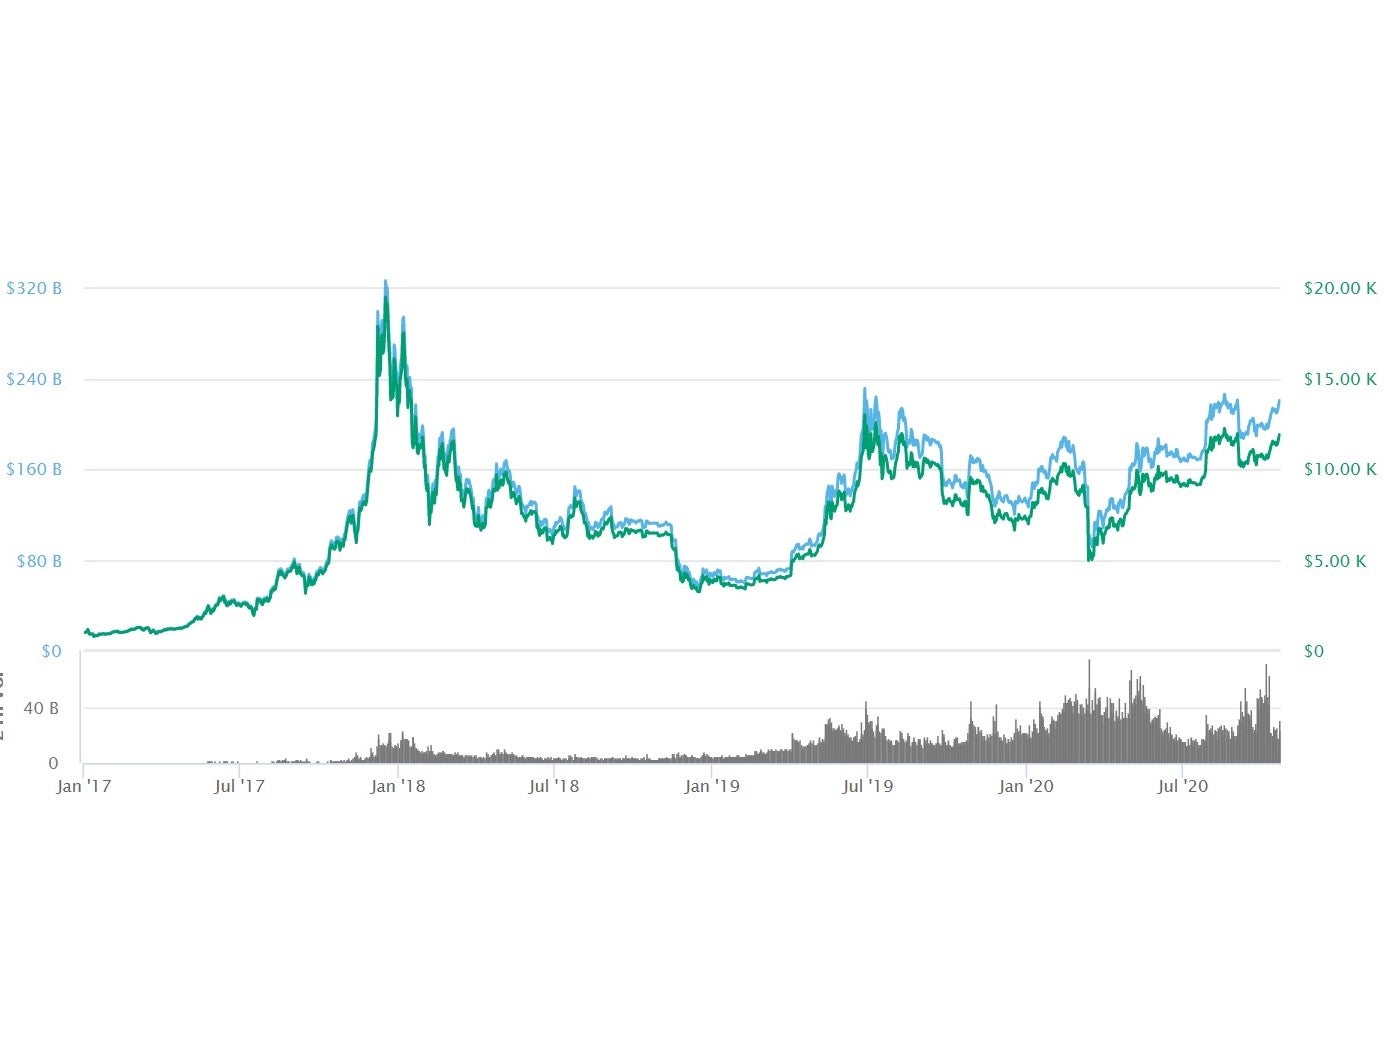 Bitcoin’s price (green) and market cap (blue) have experienced extreme volatility since 2017